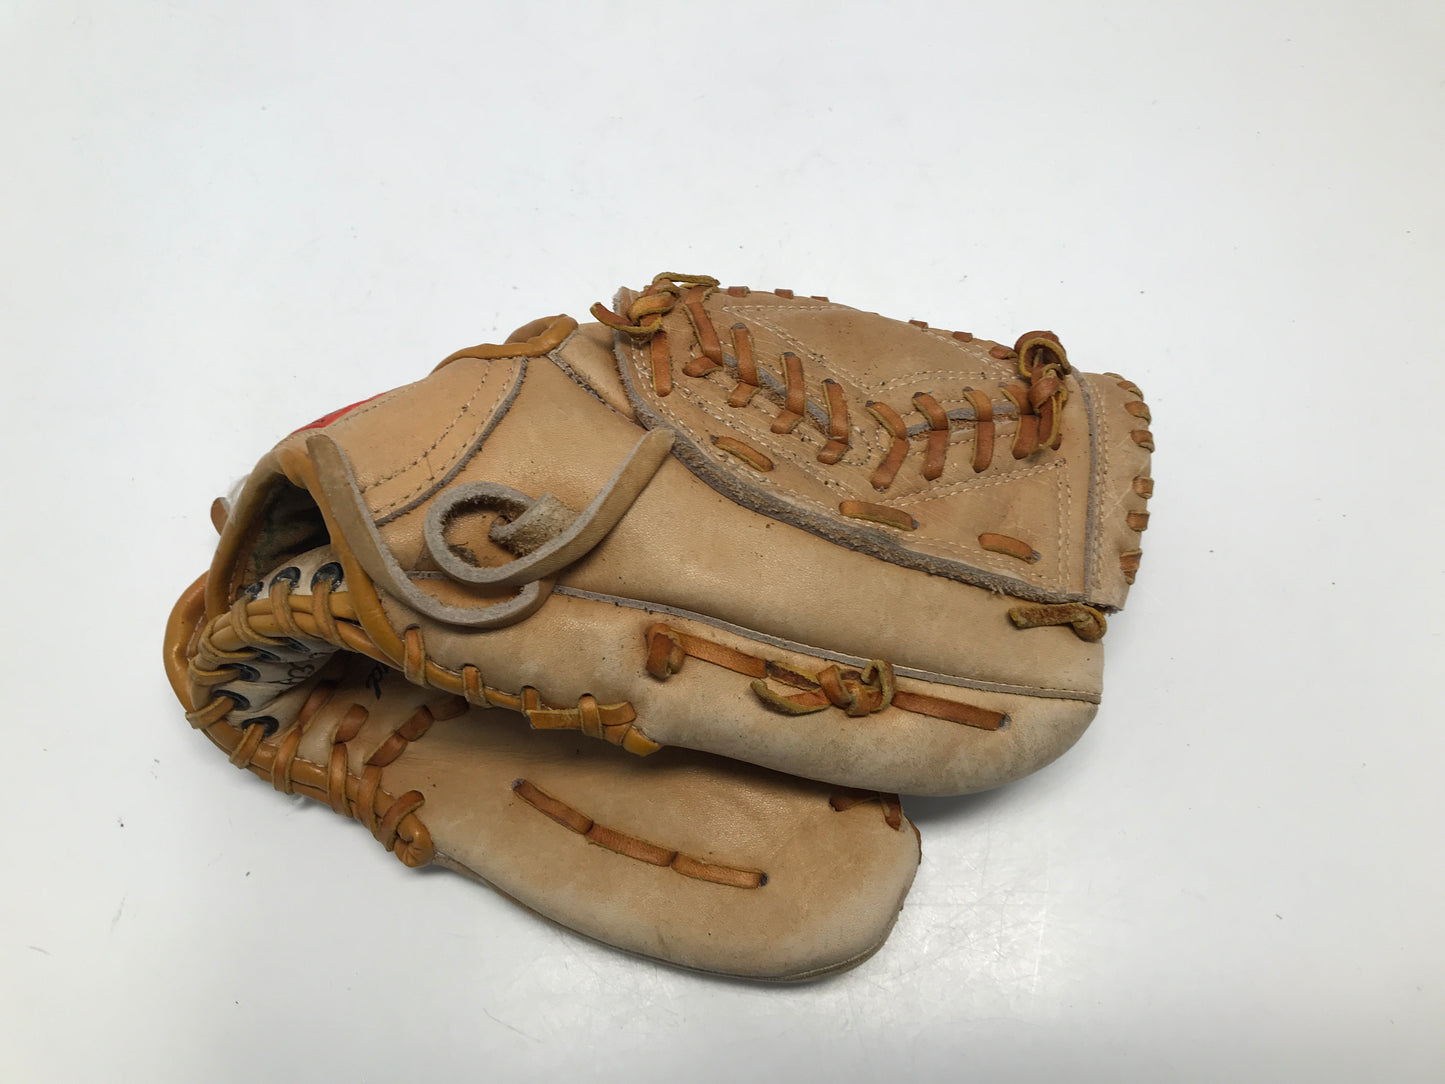 Baseball Glove Child Size 11.5 Mac Greaser Tan Leather Fits Left Hand